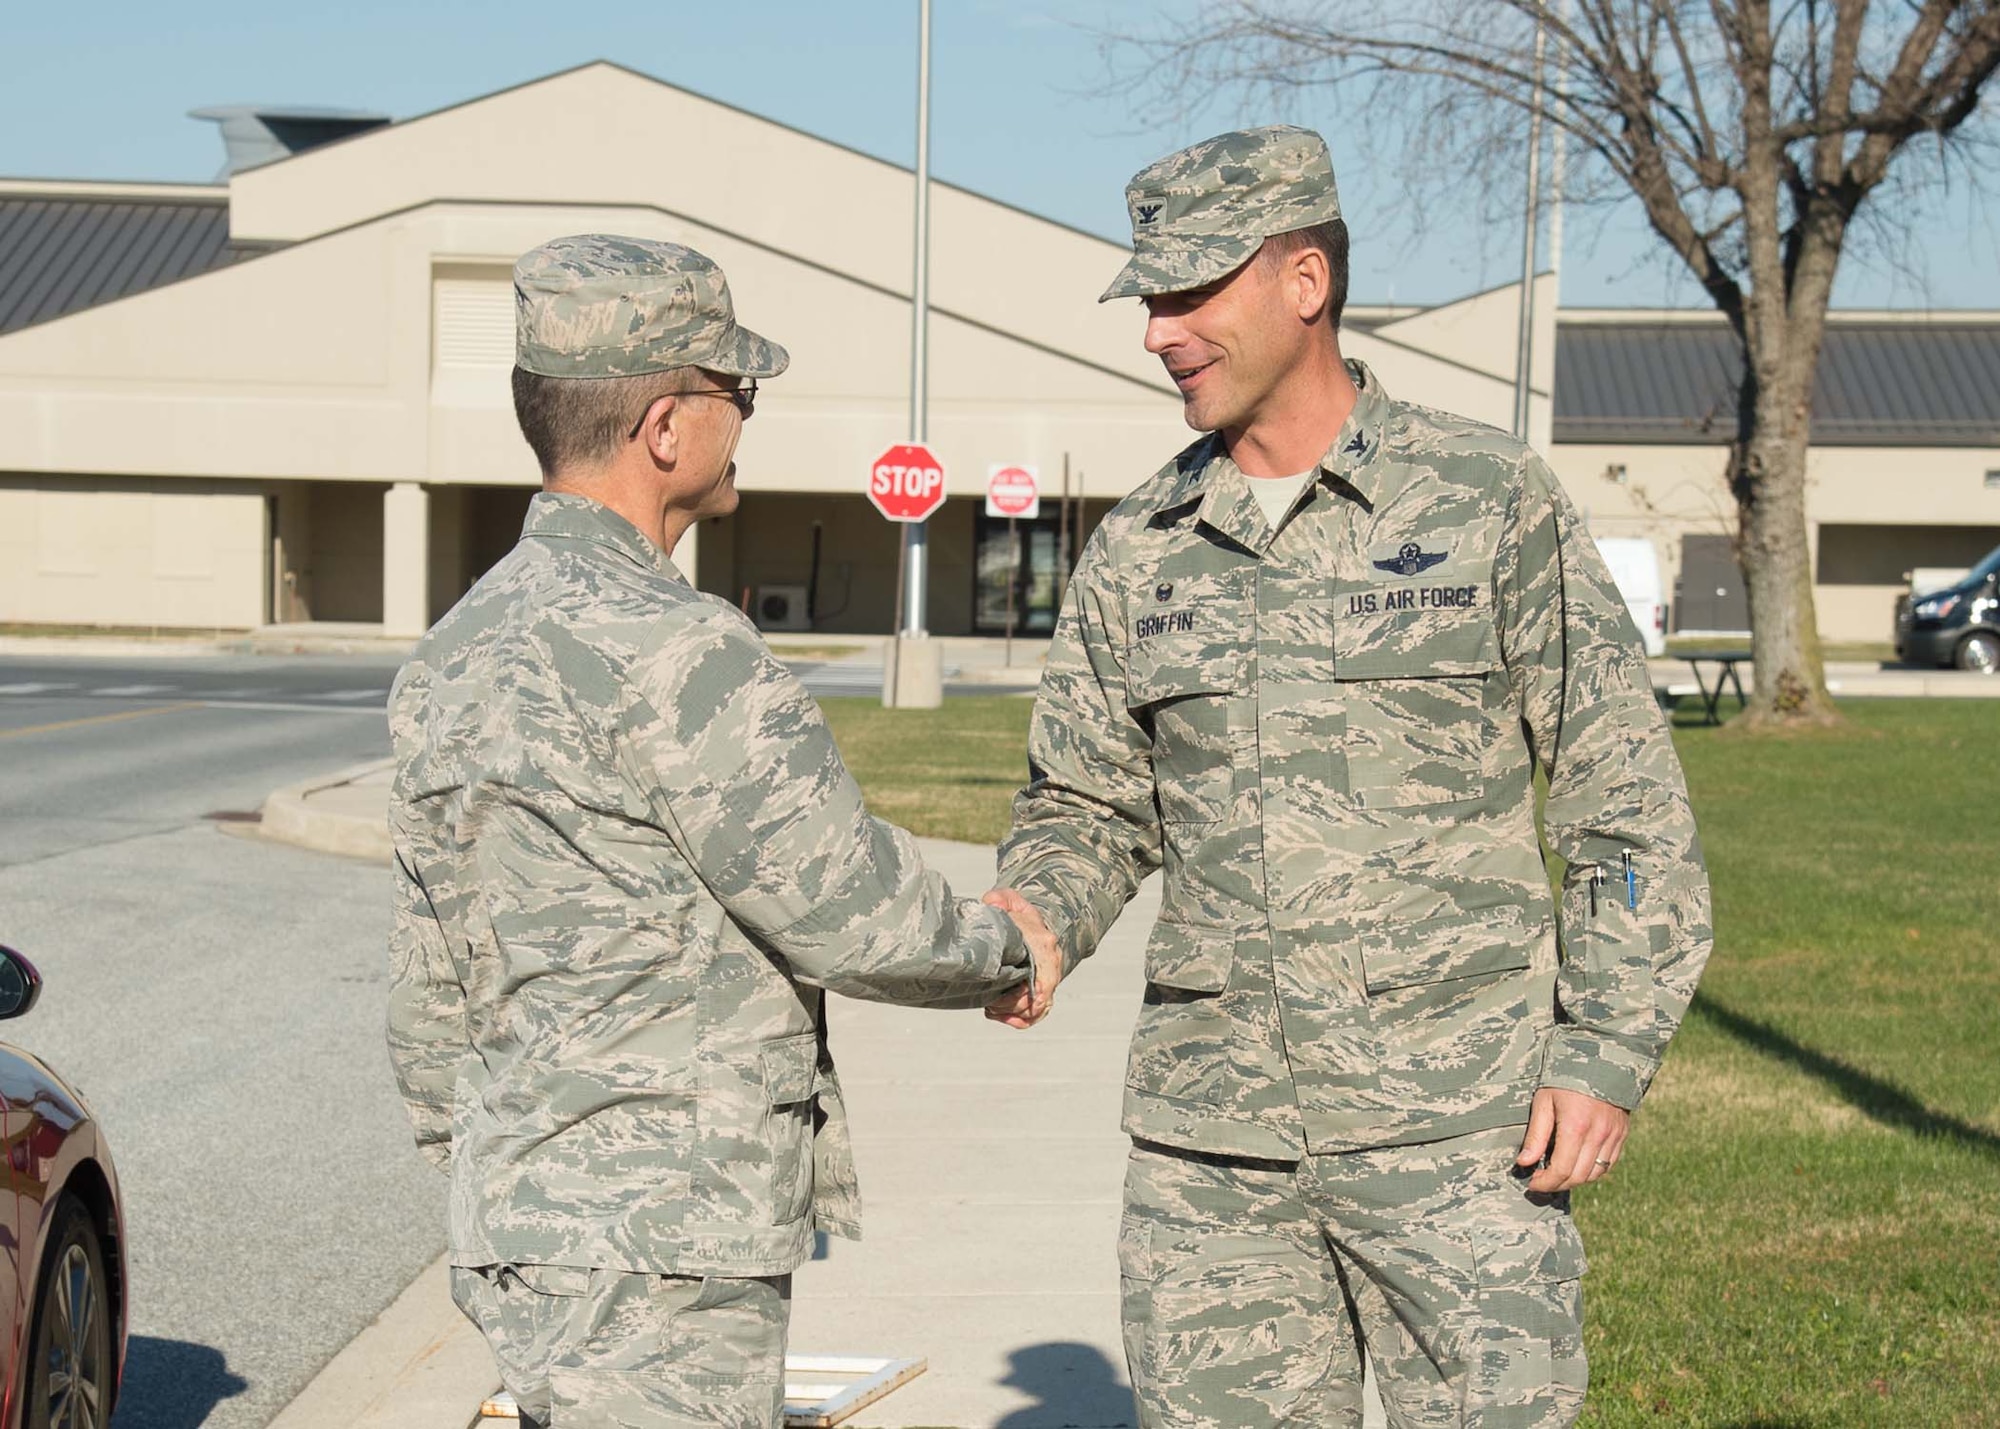 Brig. Gen. Steven Bleymaier, Director of Logistics, Engineering and Force Protection, Headquarters Air Mobility Command, is greeted by Col. Ethan Griffin, commander of the 436th Airlift Wing, upon arrival Nov. 29, 2017, at Dover Air Force Base, Del.